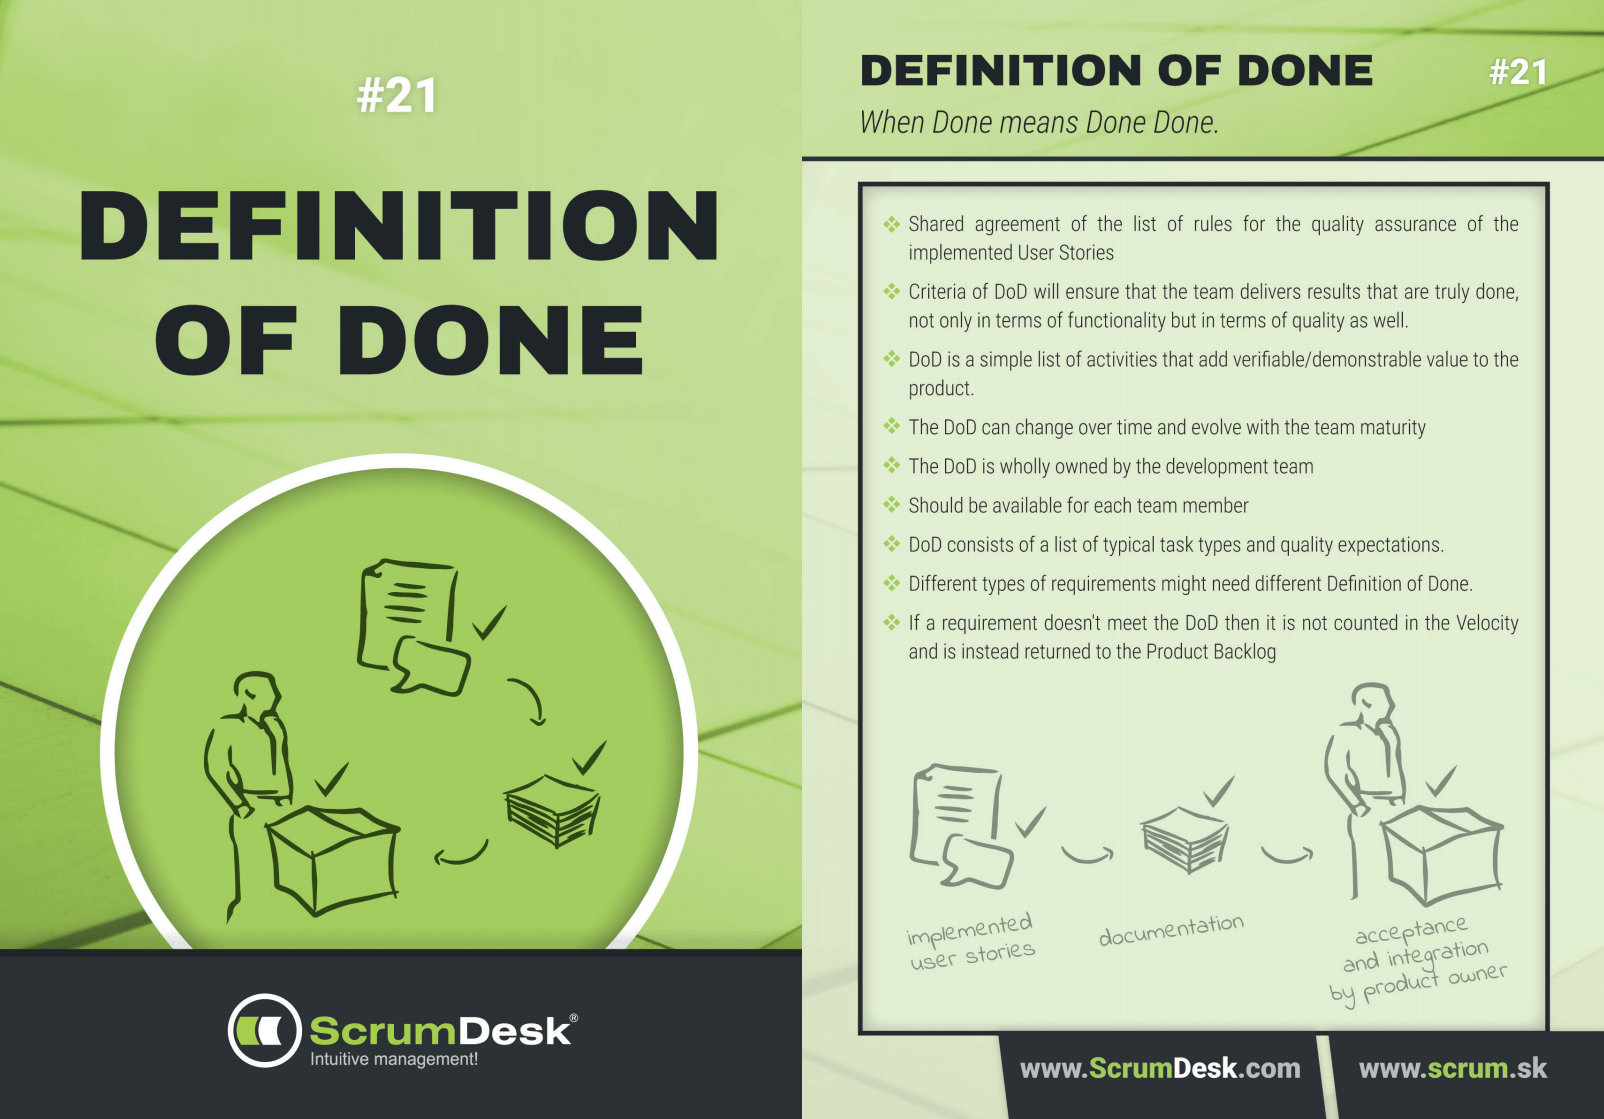 scrum karty 21 - definition of done